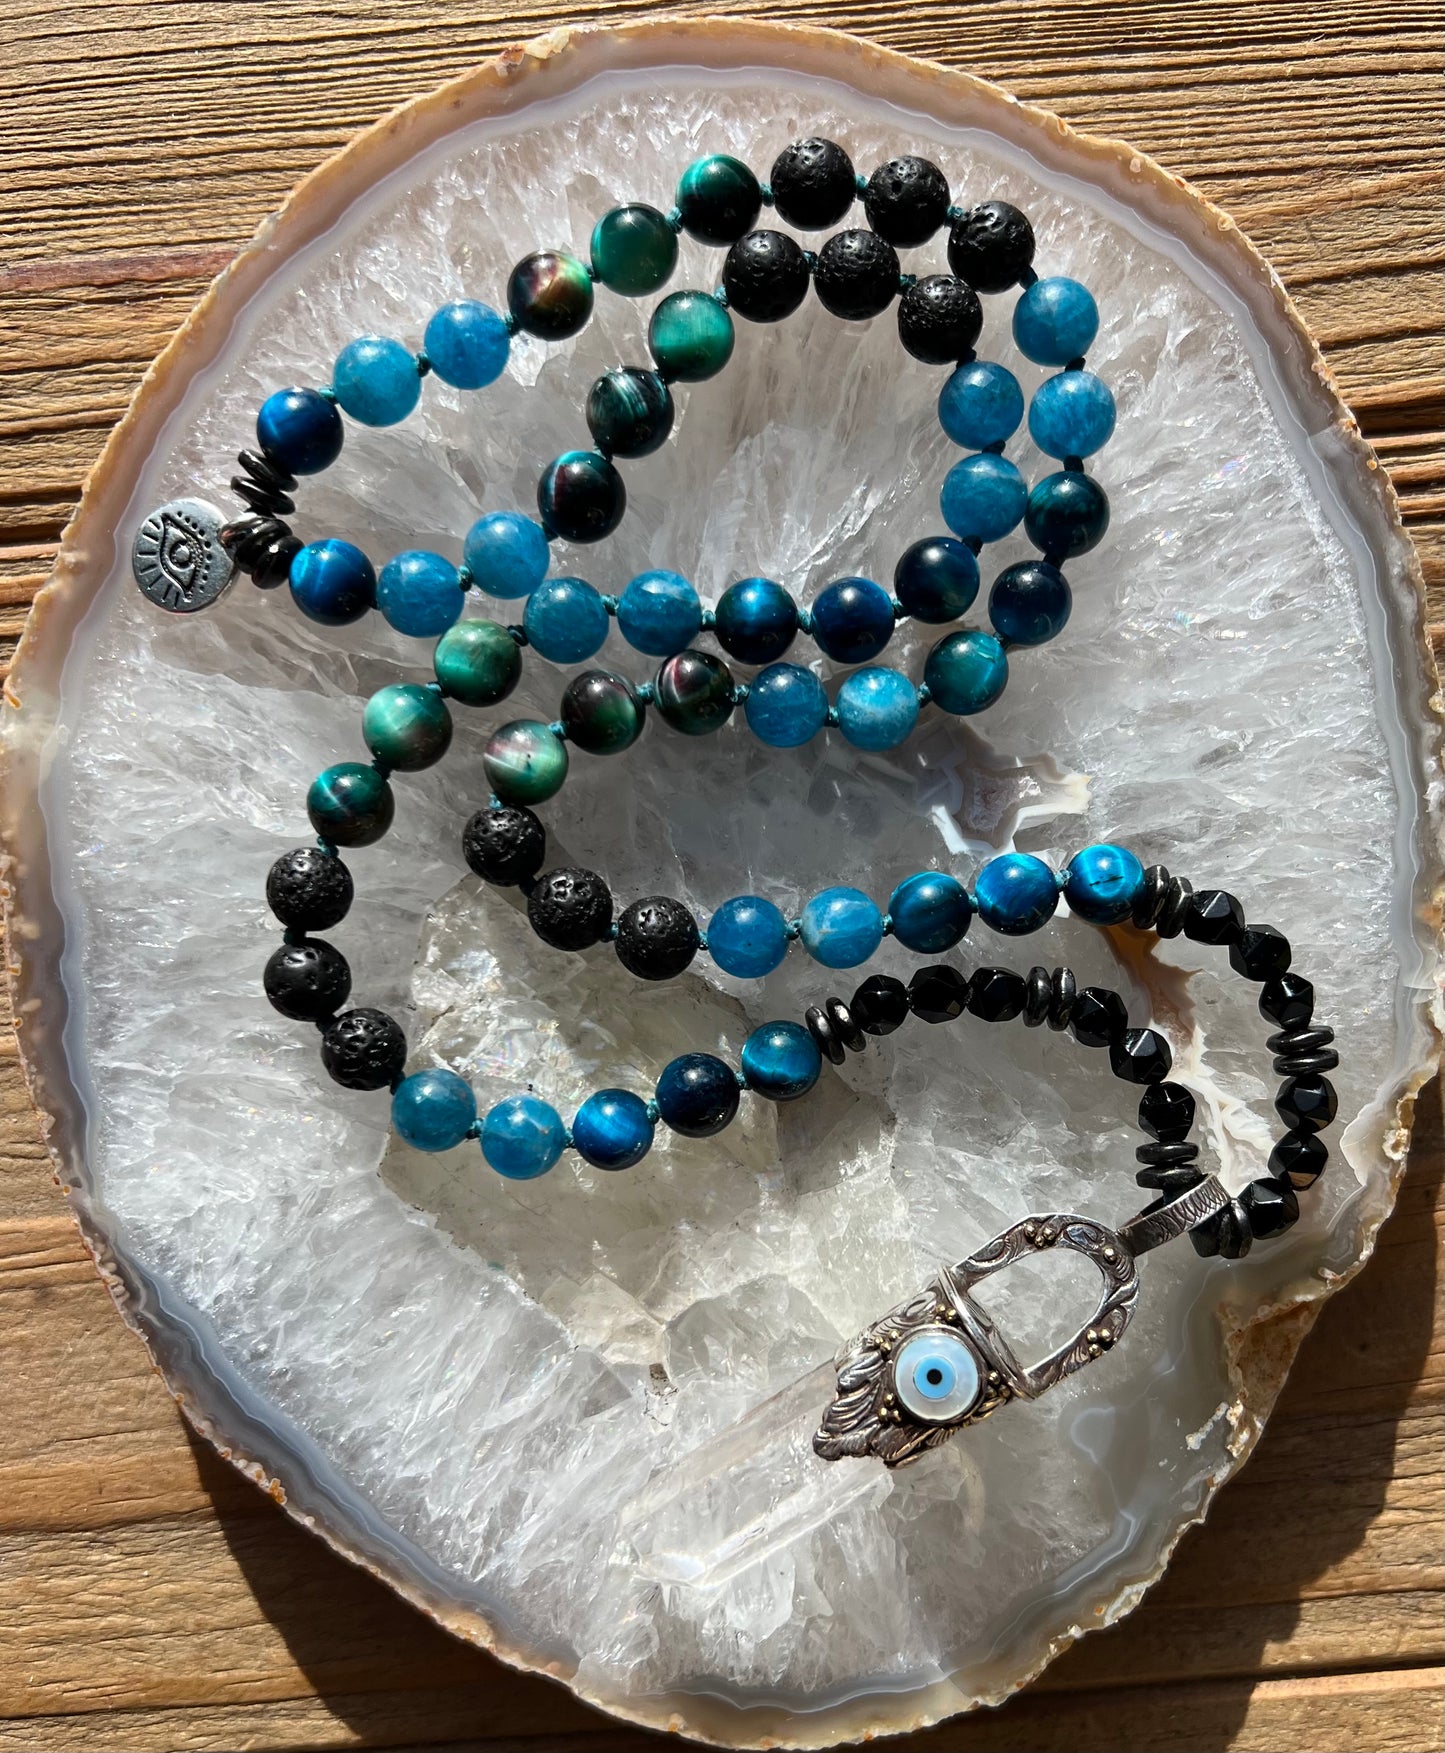 Mālā Half with Tigers Eye, Apatite Beads and a Clear Quartz Pendant